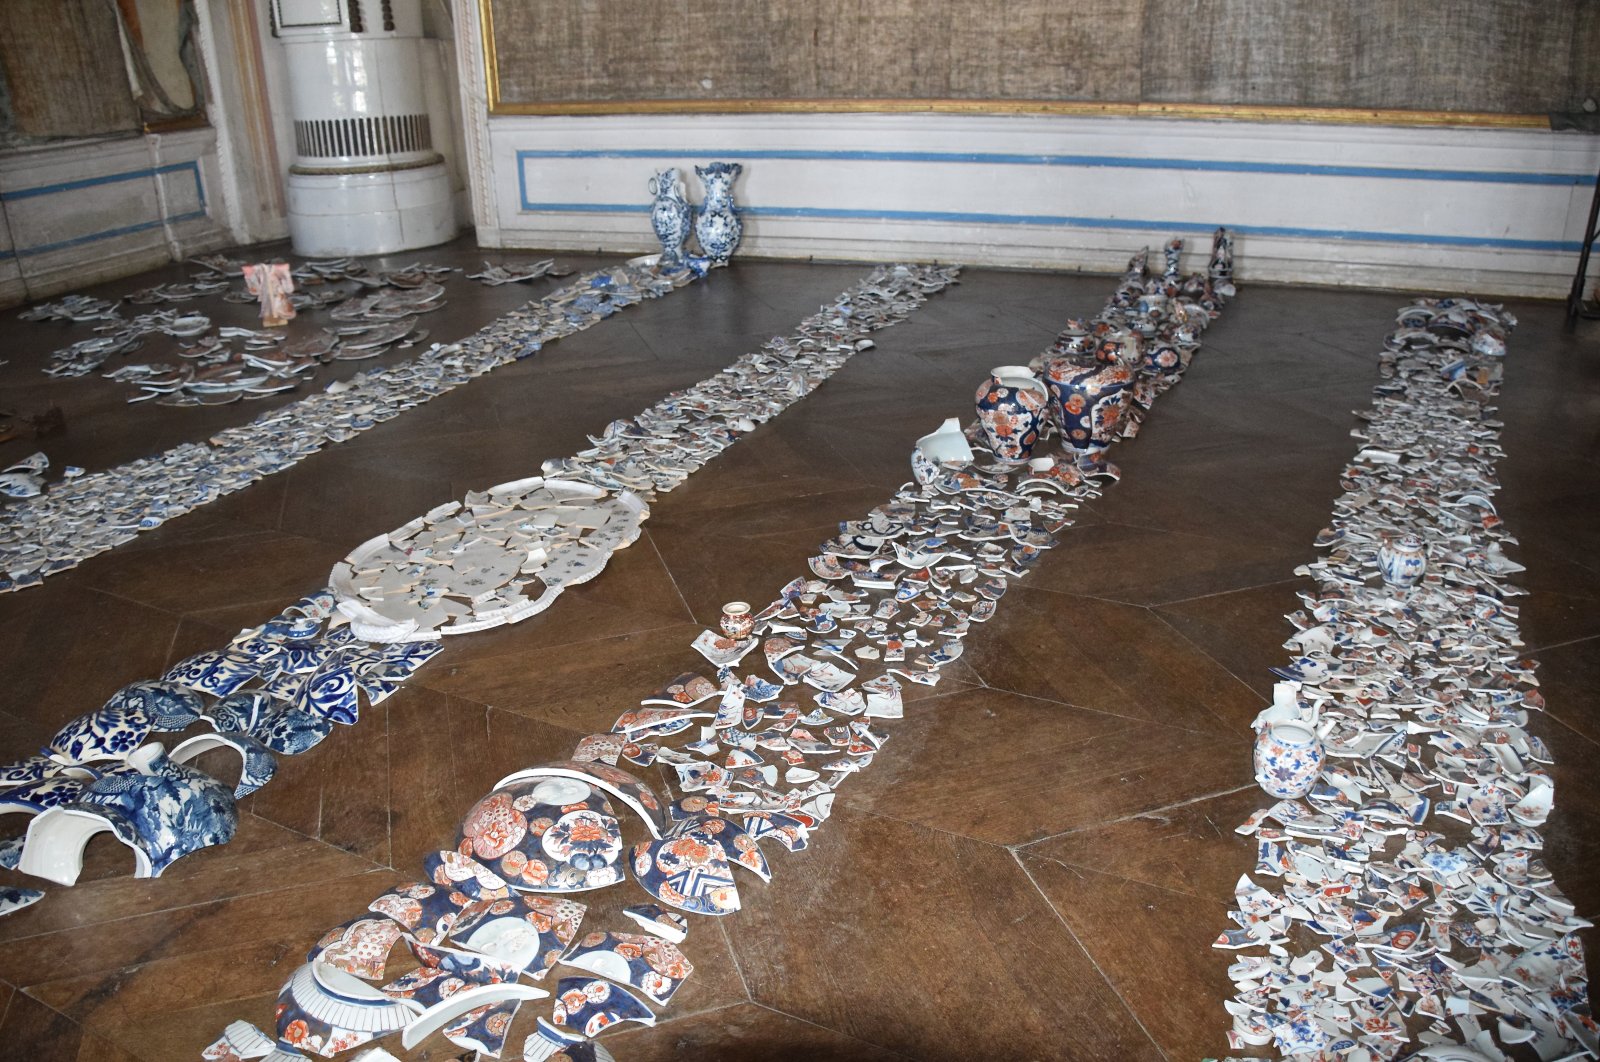 Shards of Imari porcelain lie on the floor in a room of Loosdorf Castle. (dpa)